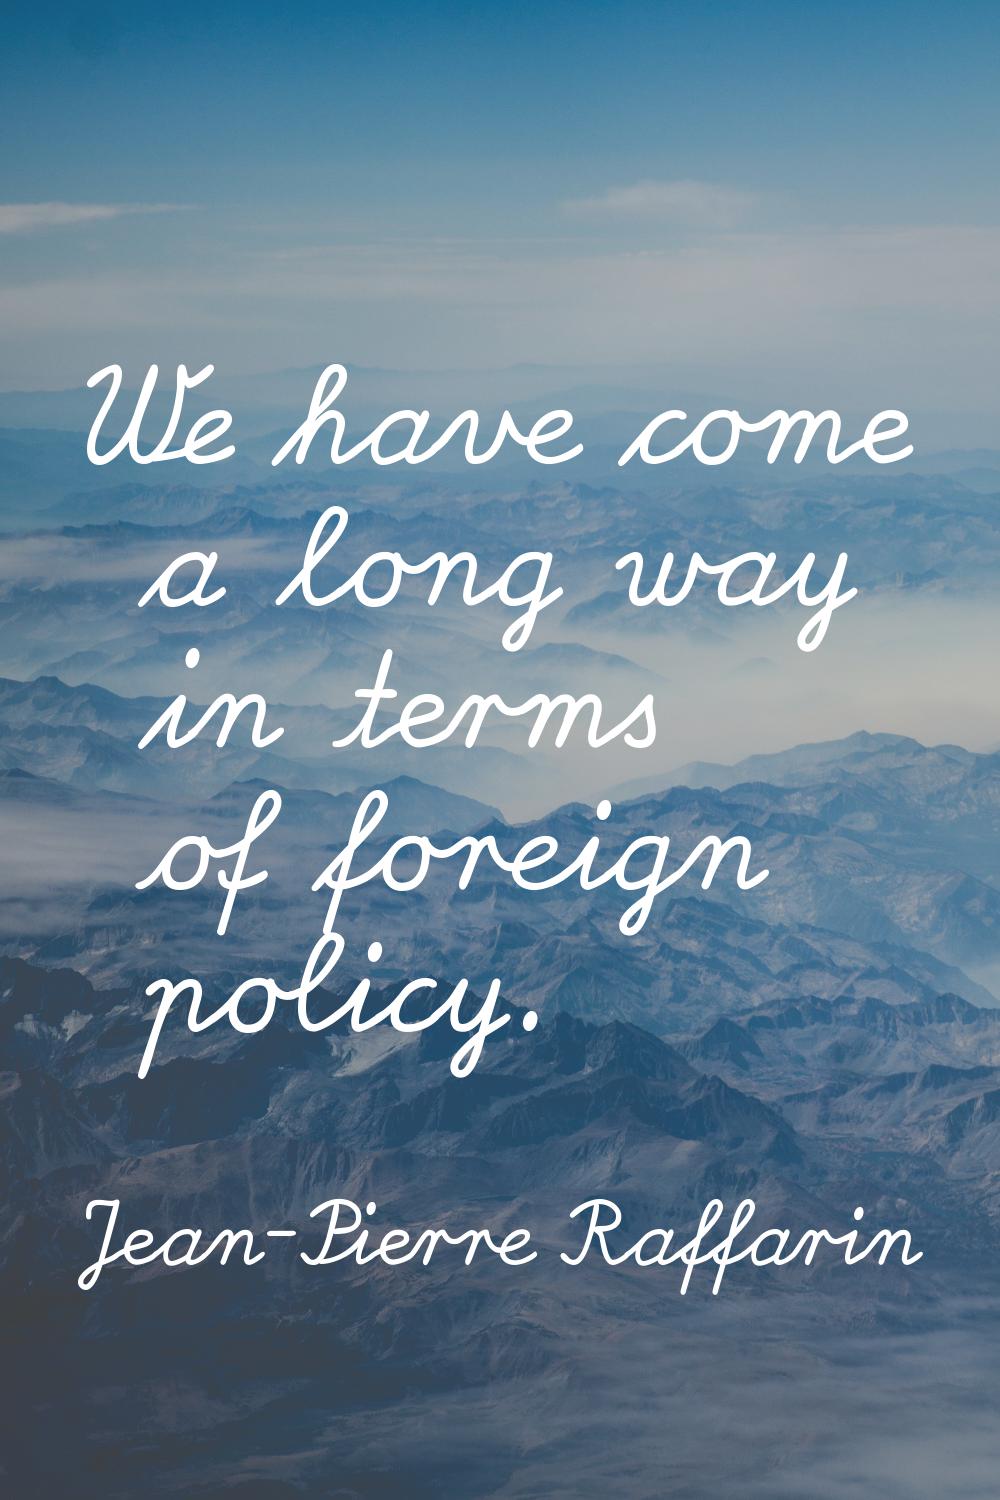 We have come a long way in terms of foreign policy.